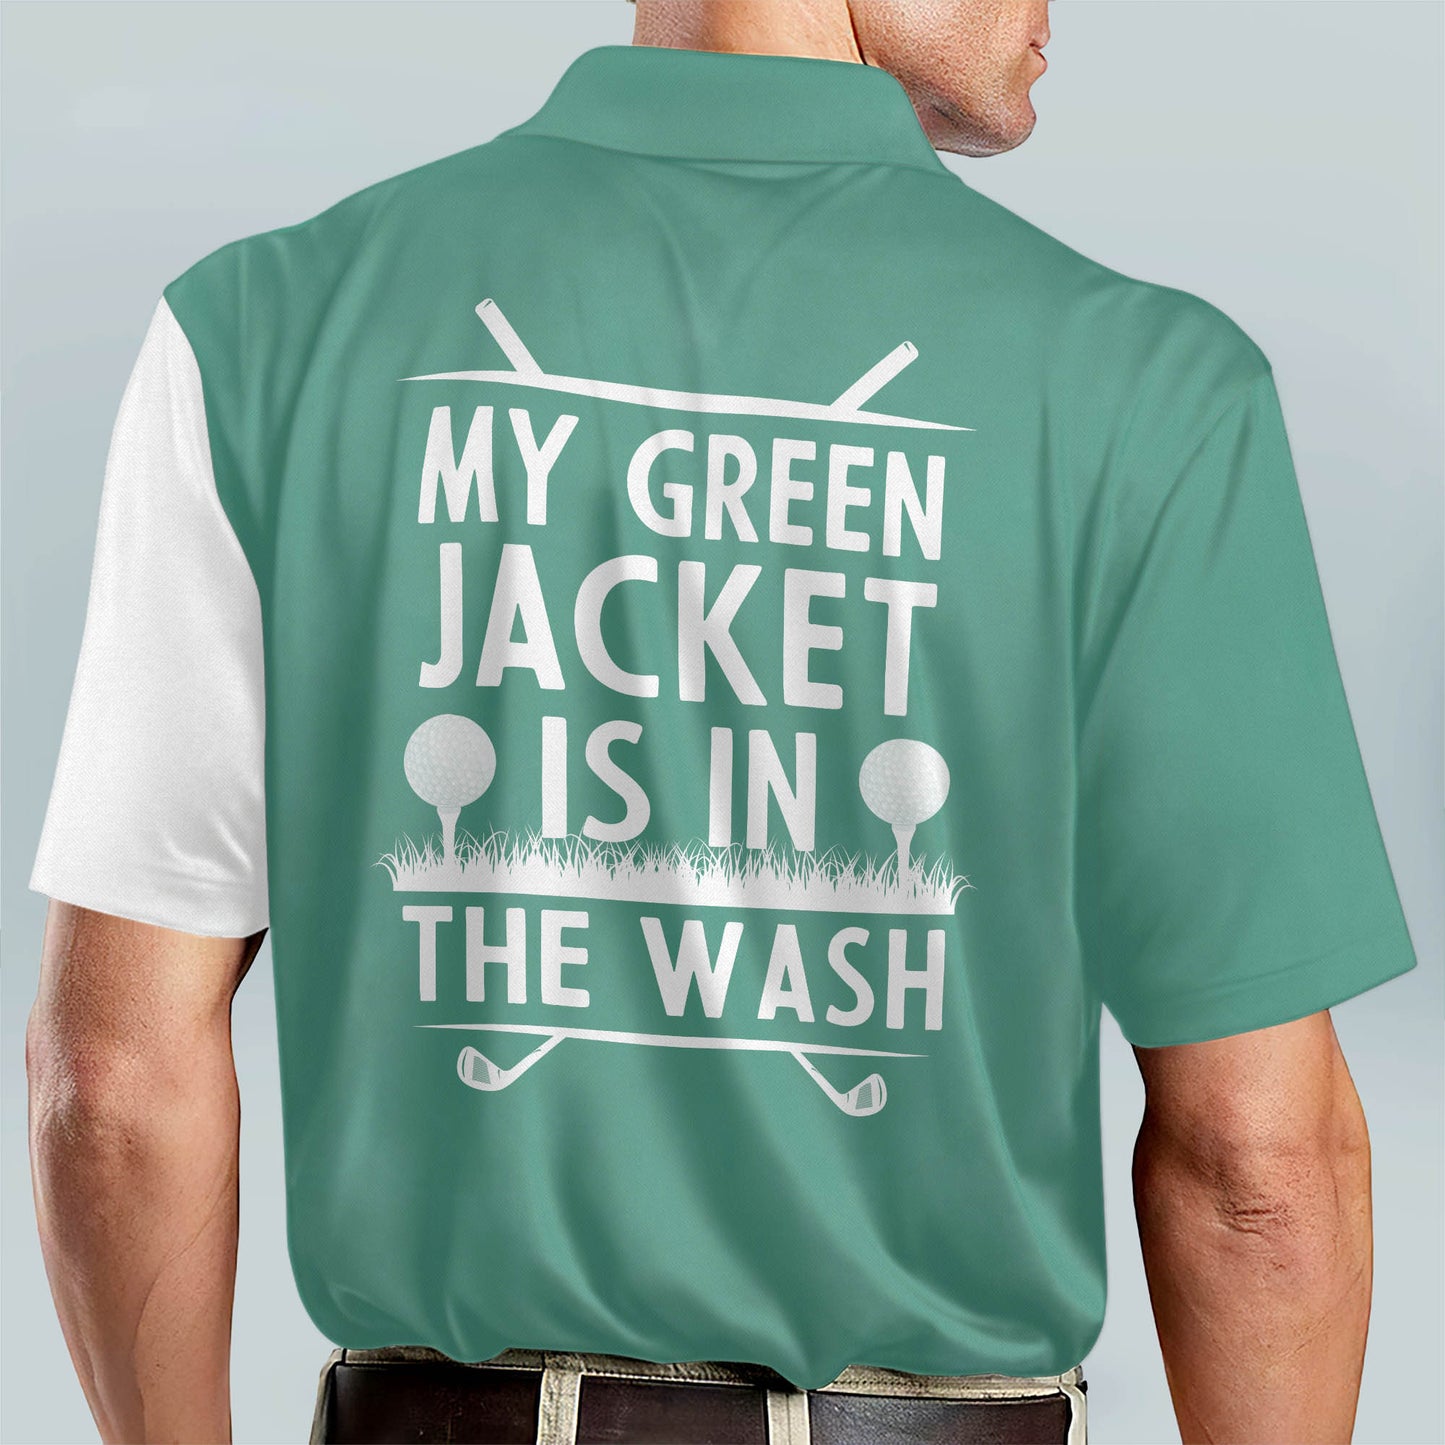 My Green Jacket is in The Wash Golf Polo Shirt GM0369